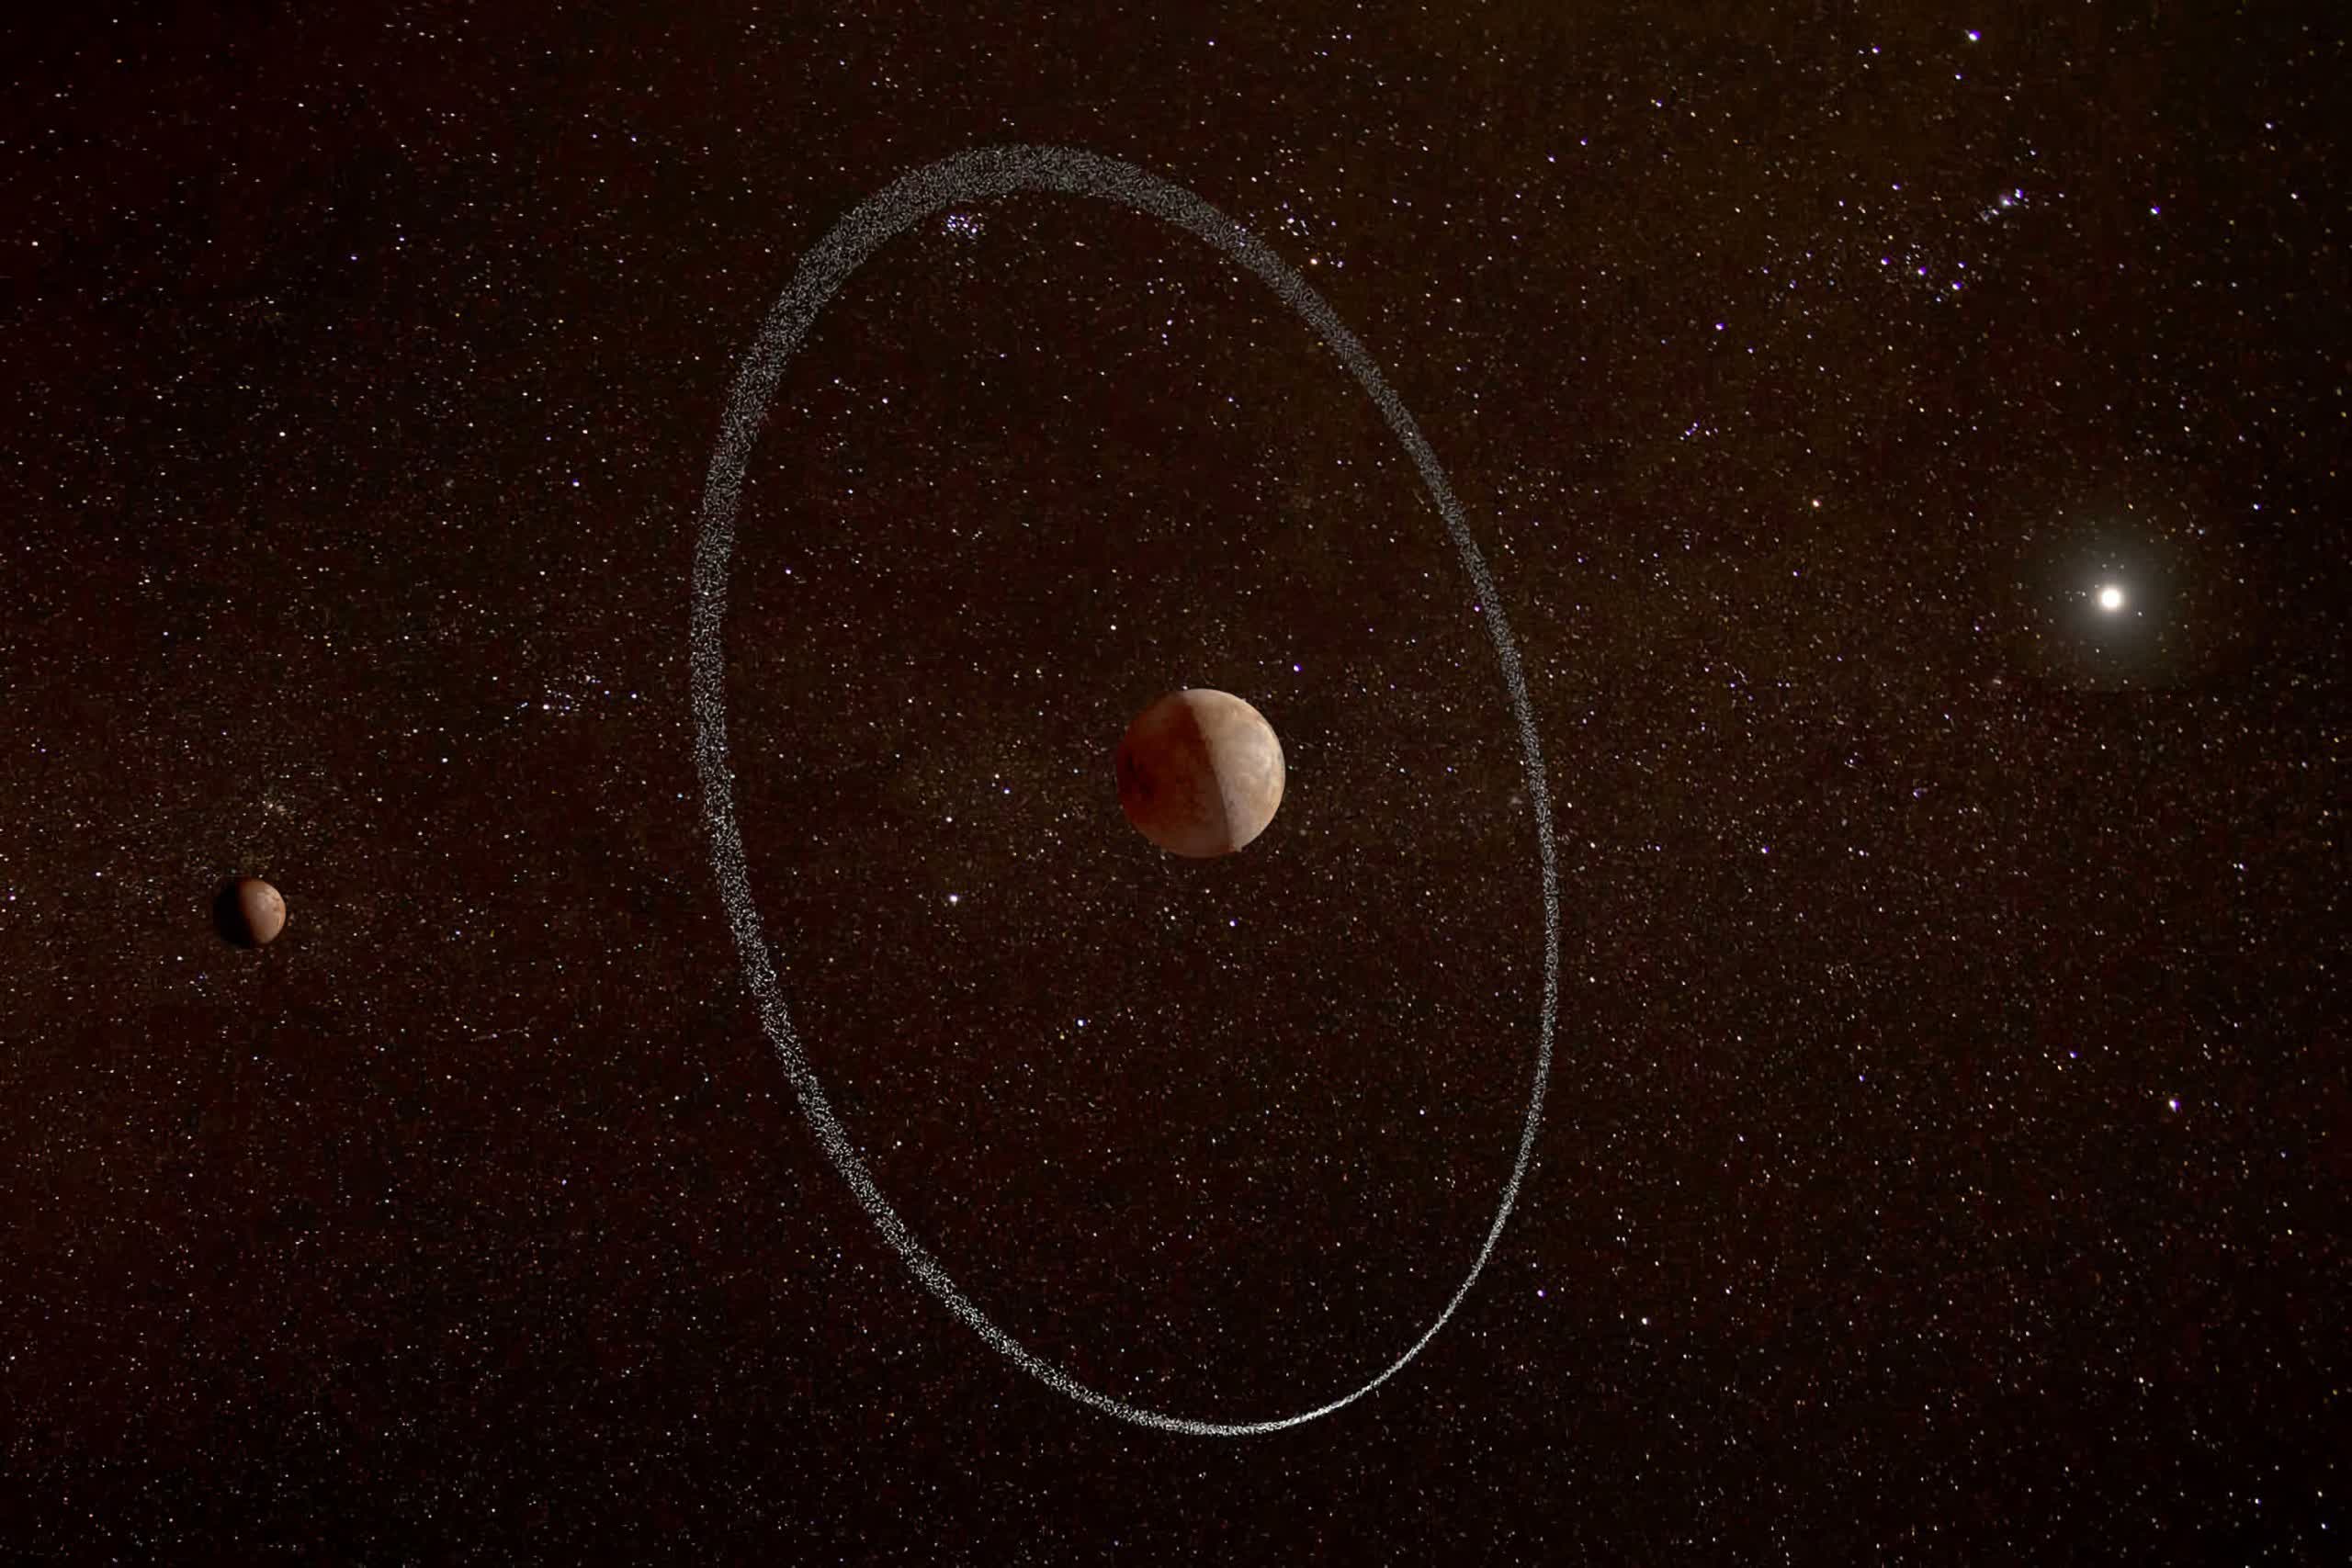 Scientists discover ring around dwarf planet but can't explain it